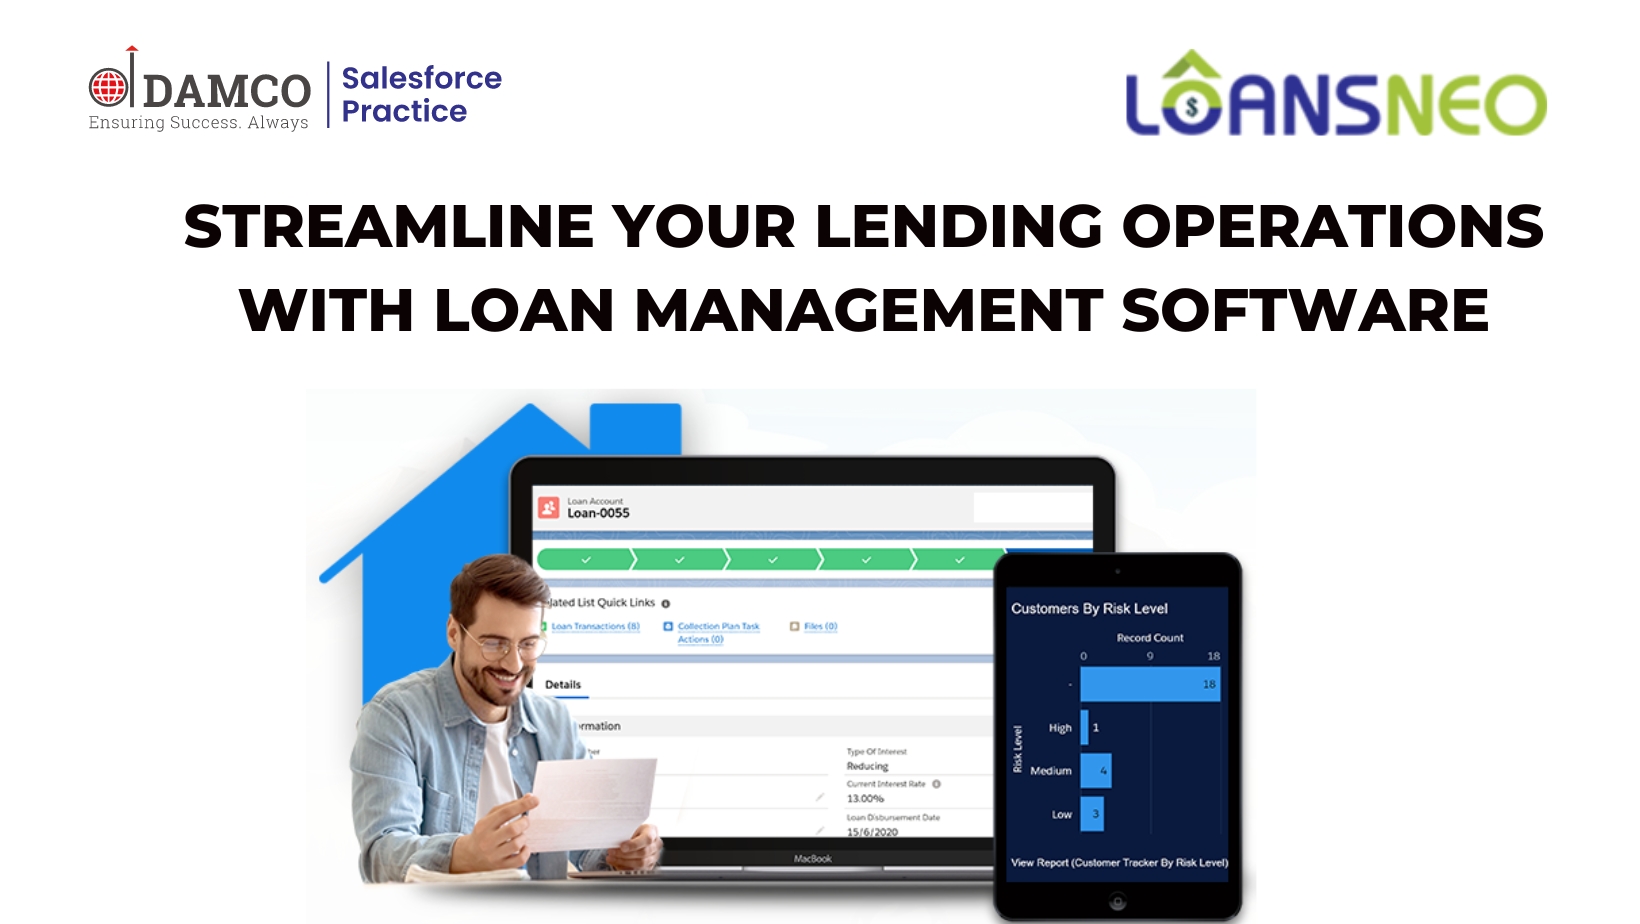 Streamline Your Lending Operations With Loan Management Software